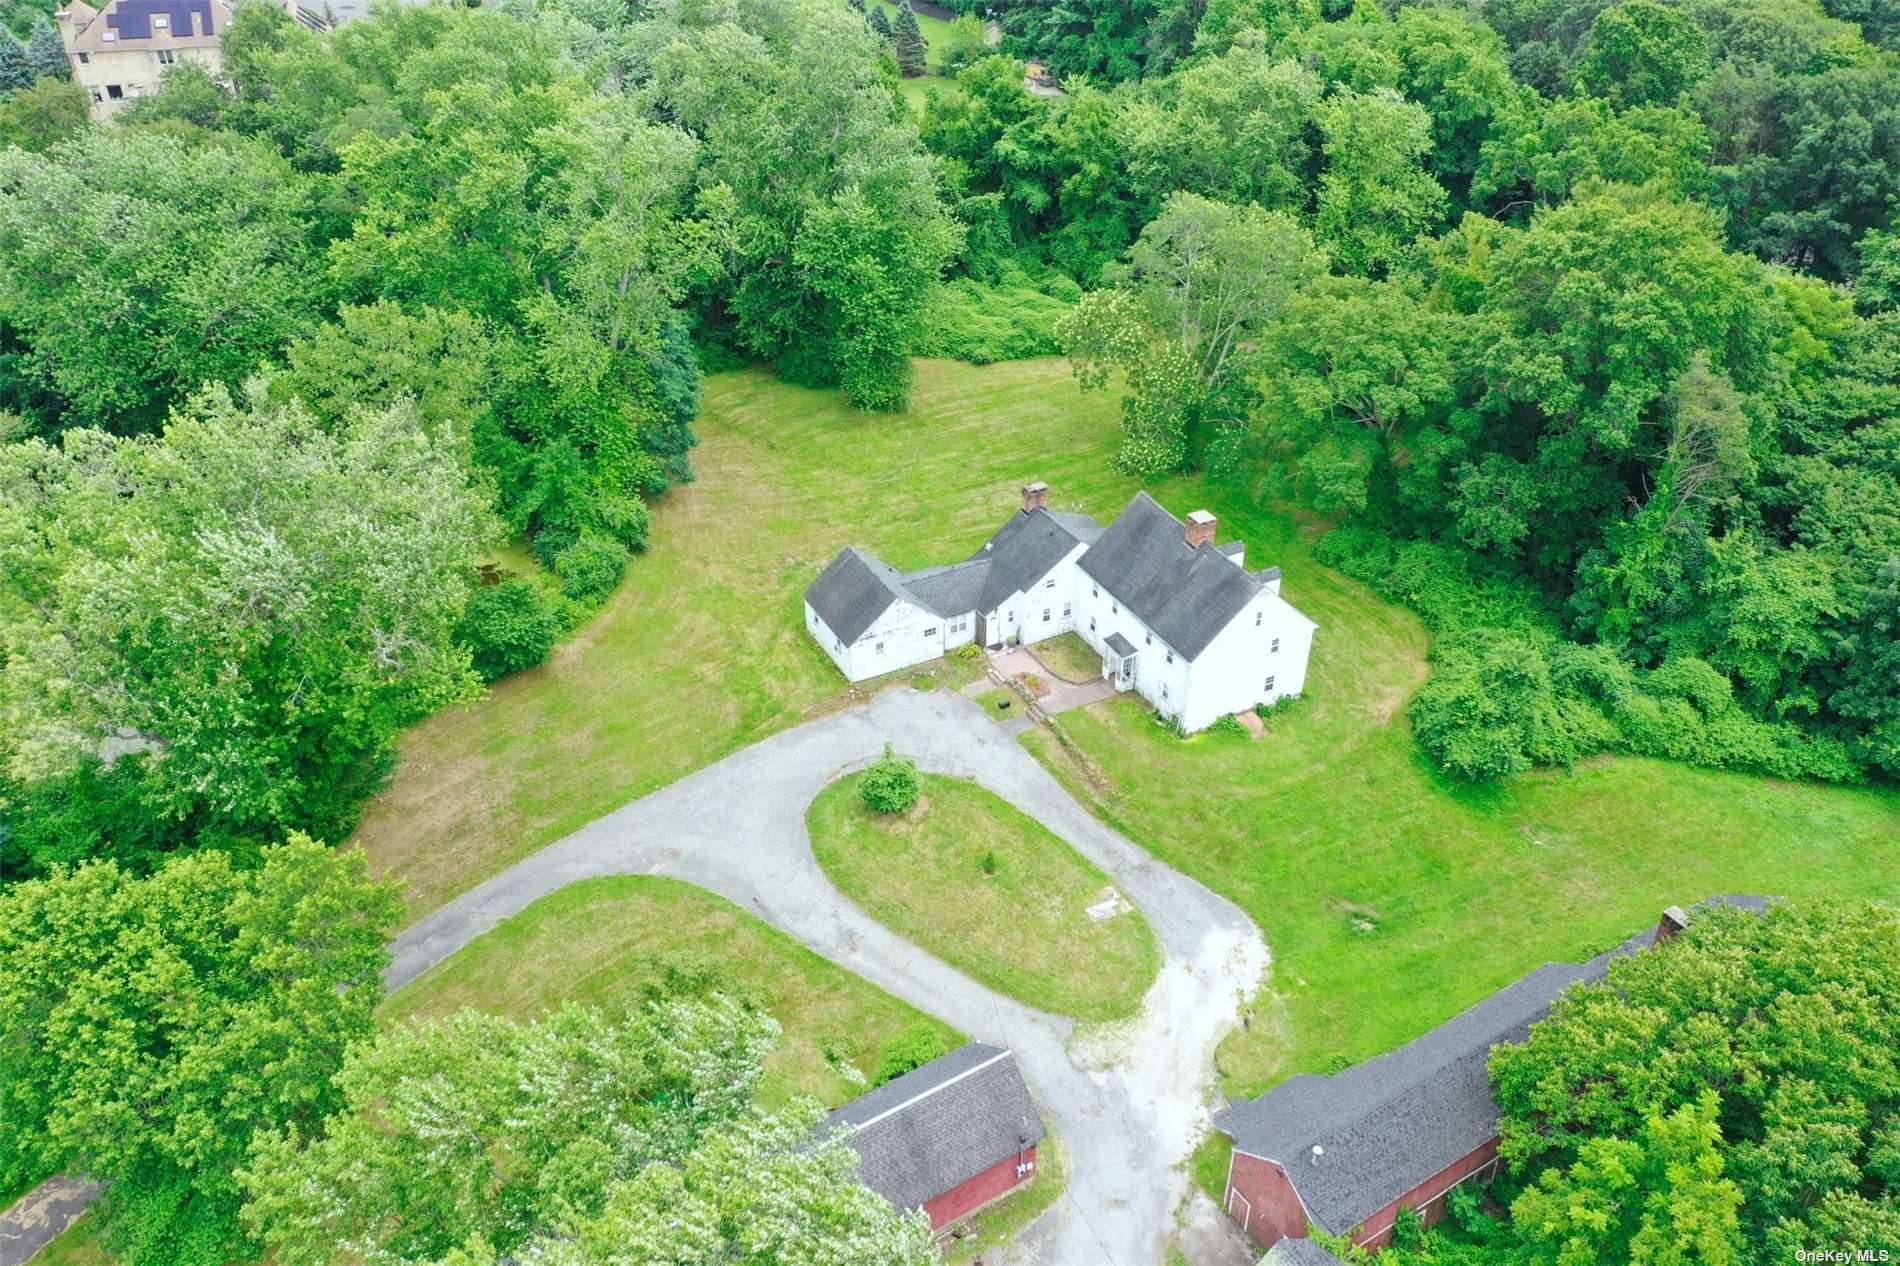 6. 9 Acre Rolling Hill Estate With Circa 1710, 8 Bedroom 5 Bathroom, 4 fireplaces, 3 story Manor house.